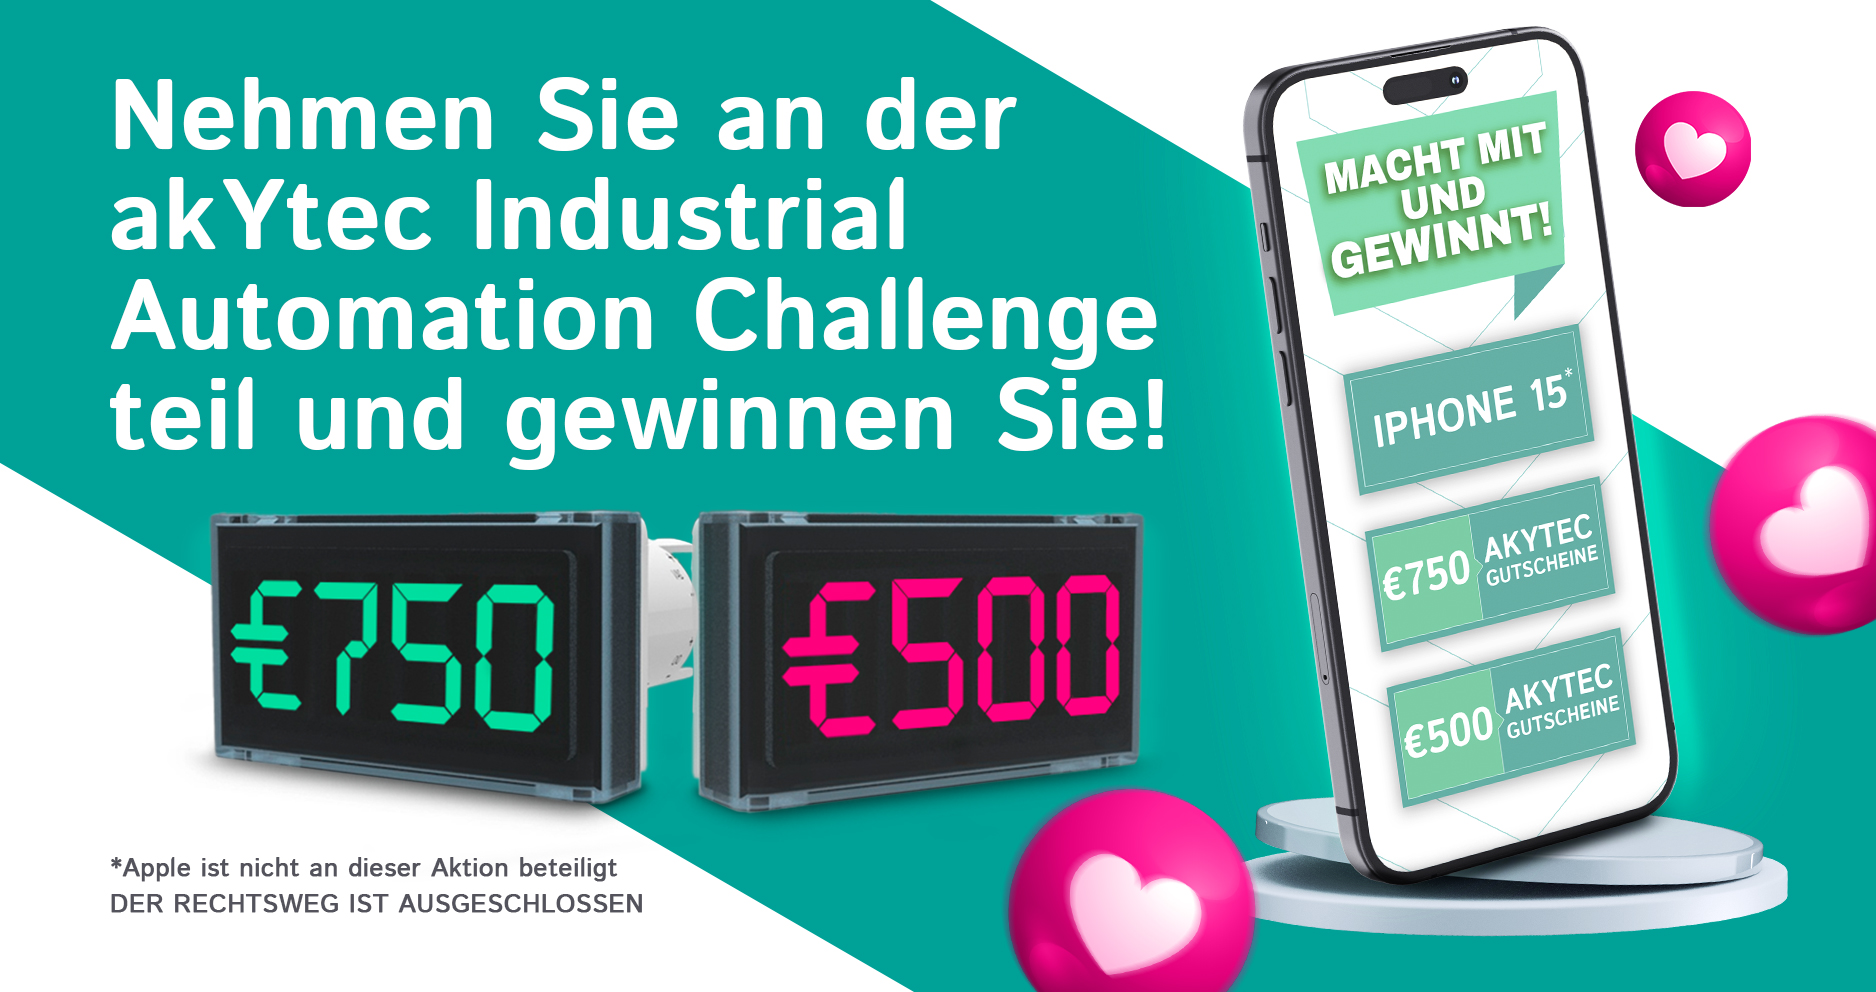 The akYtec Industrial Automation Challenge